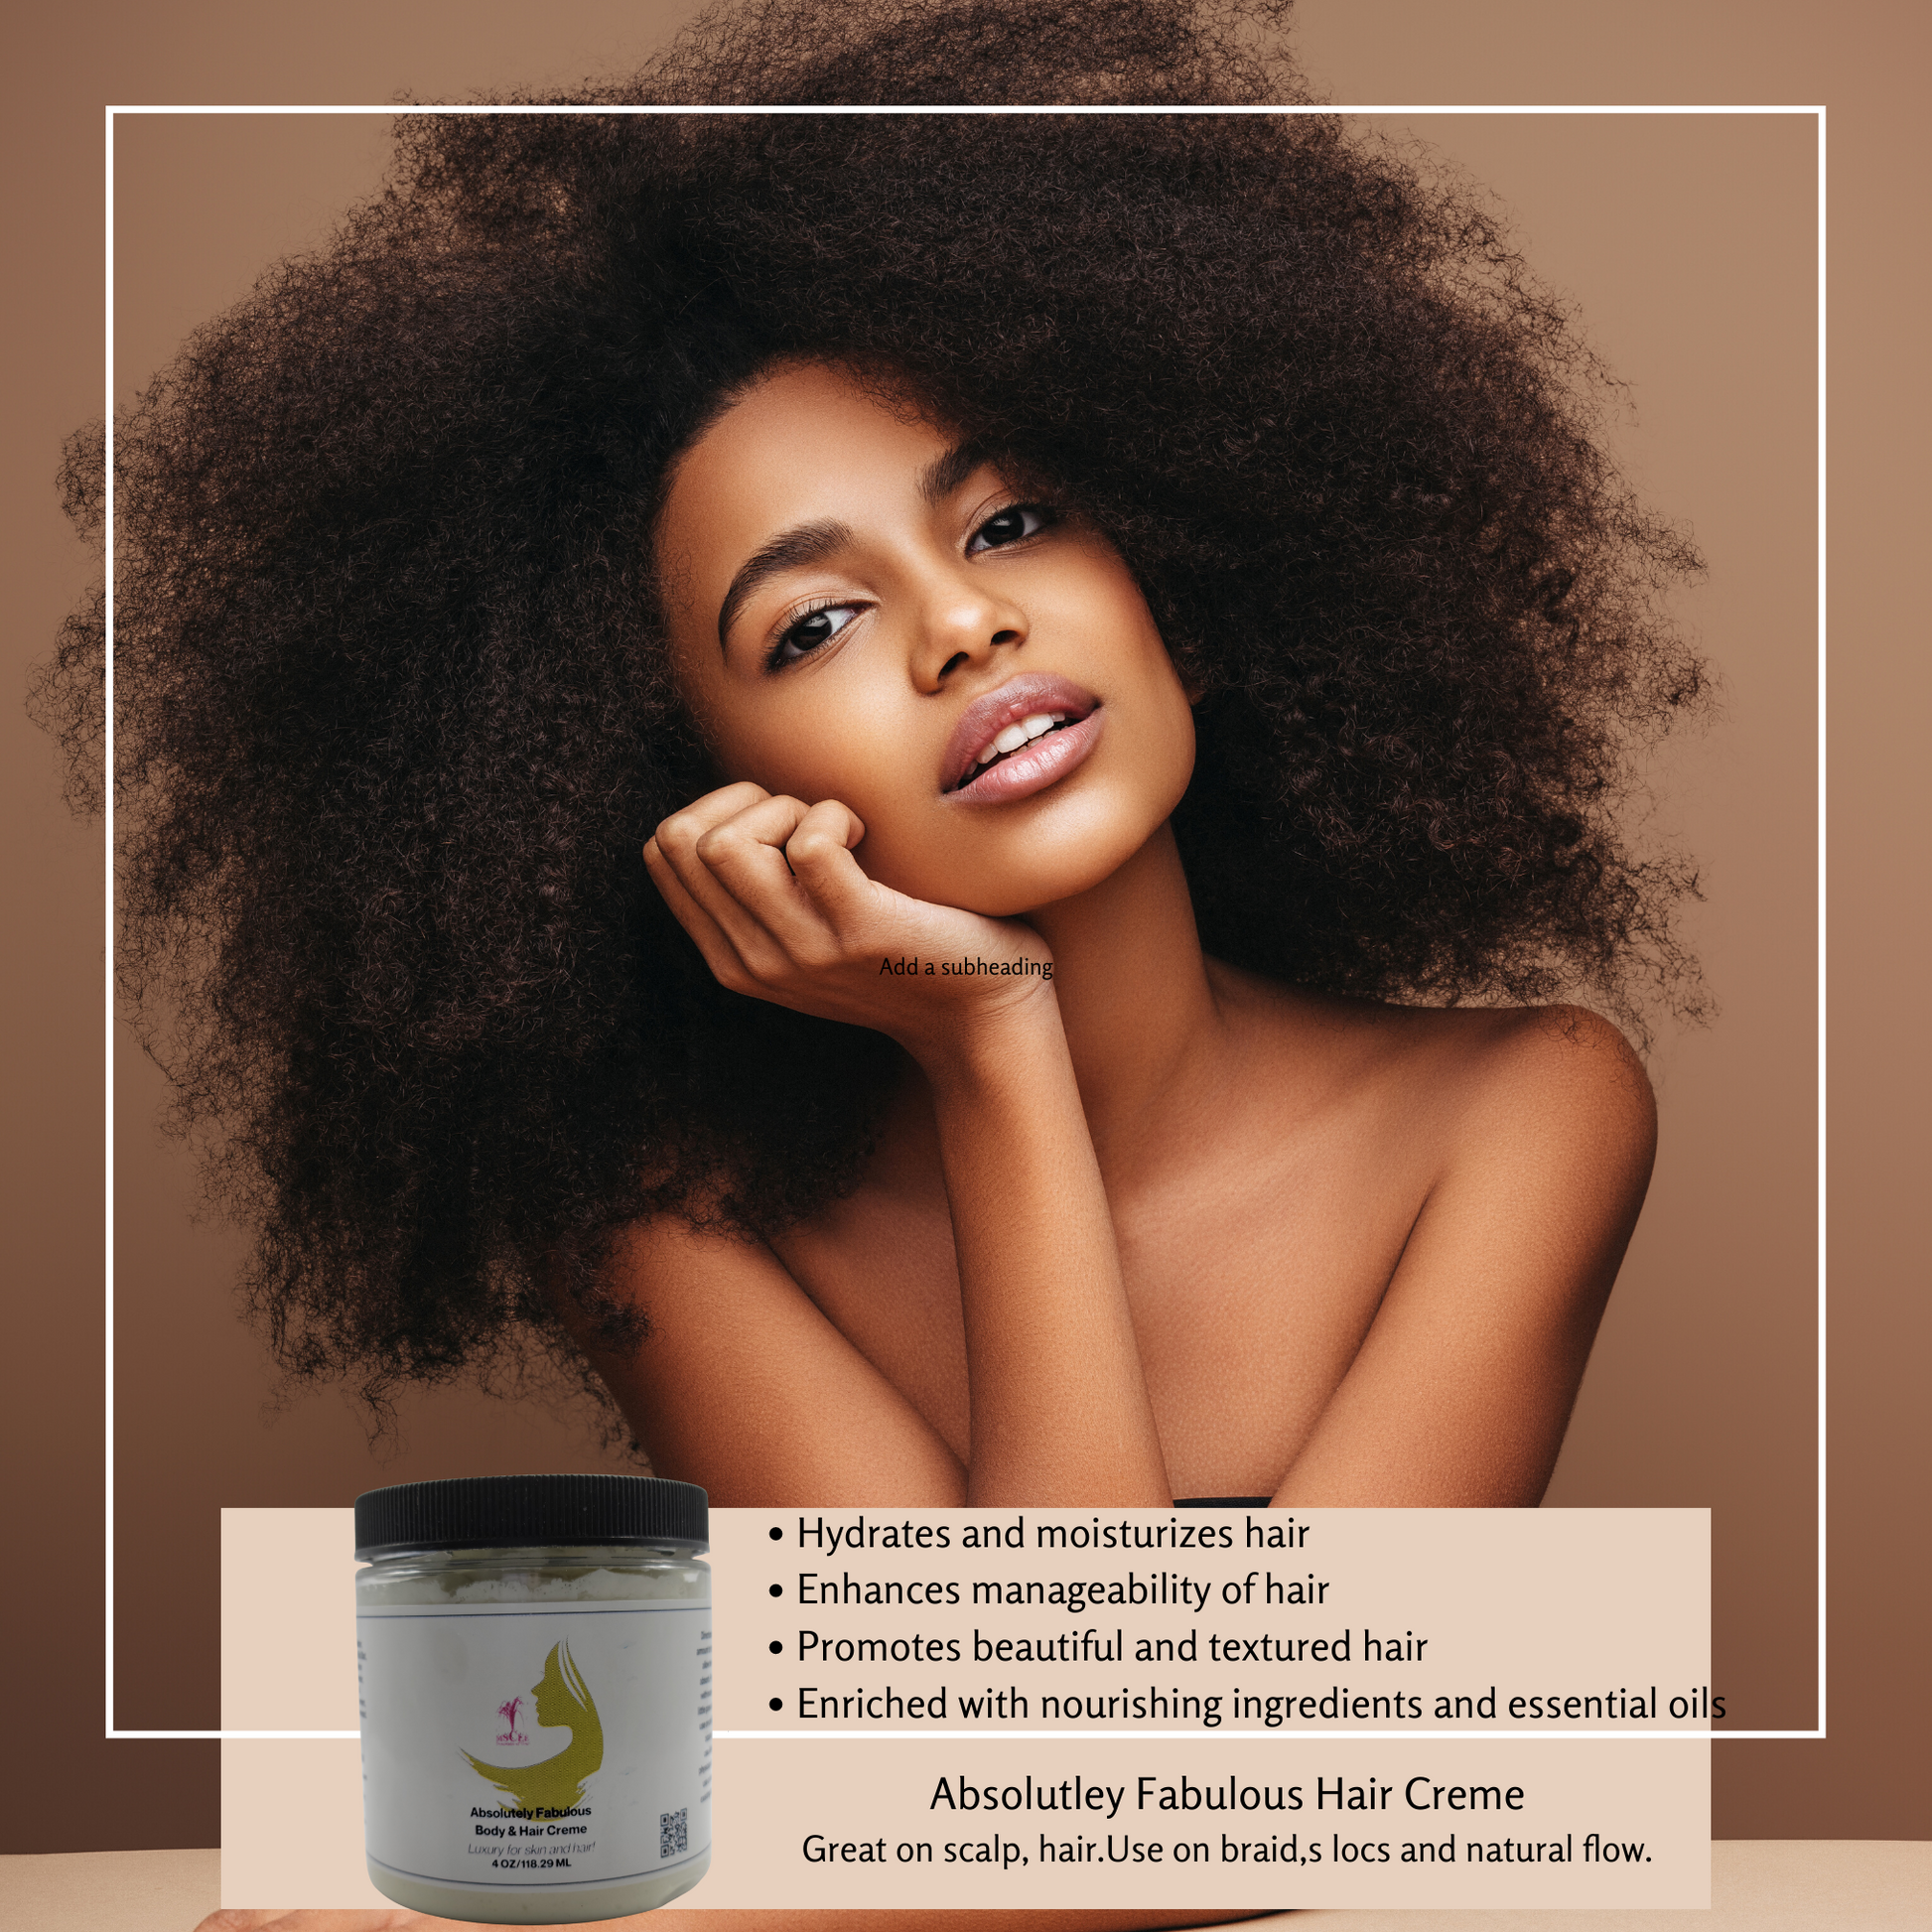 Hydrates and moisturizes hair Enhances manageability of hair Promotes beautiful and textured hair Enriched with nourishing ingredients and essential oil